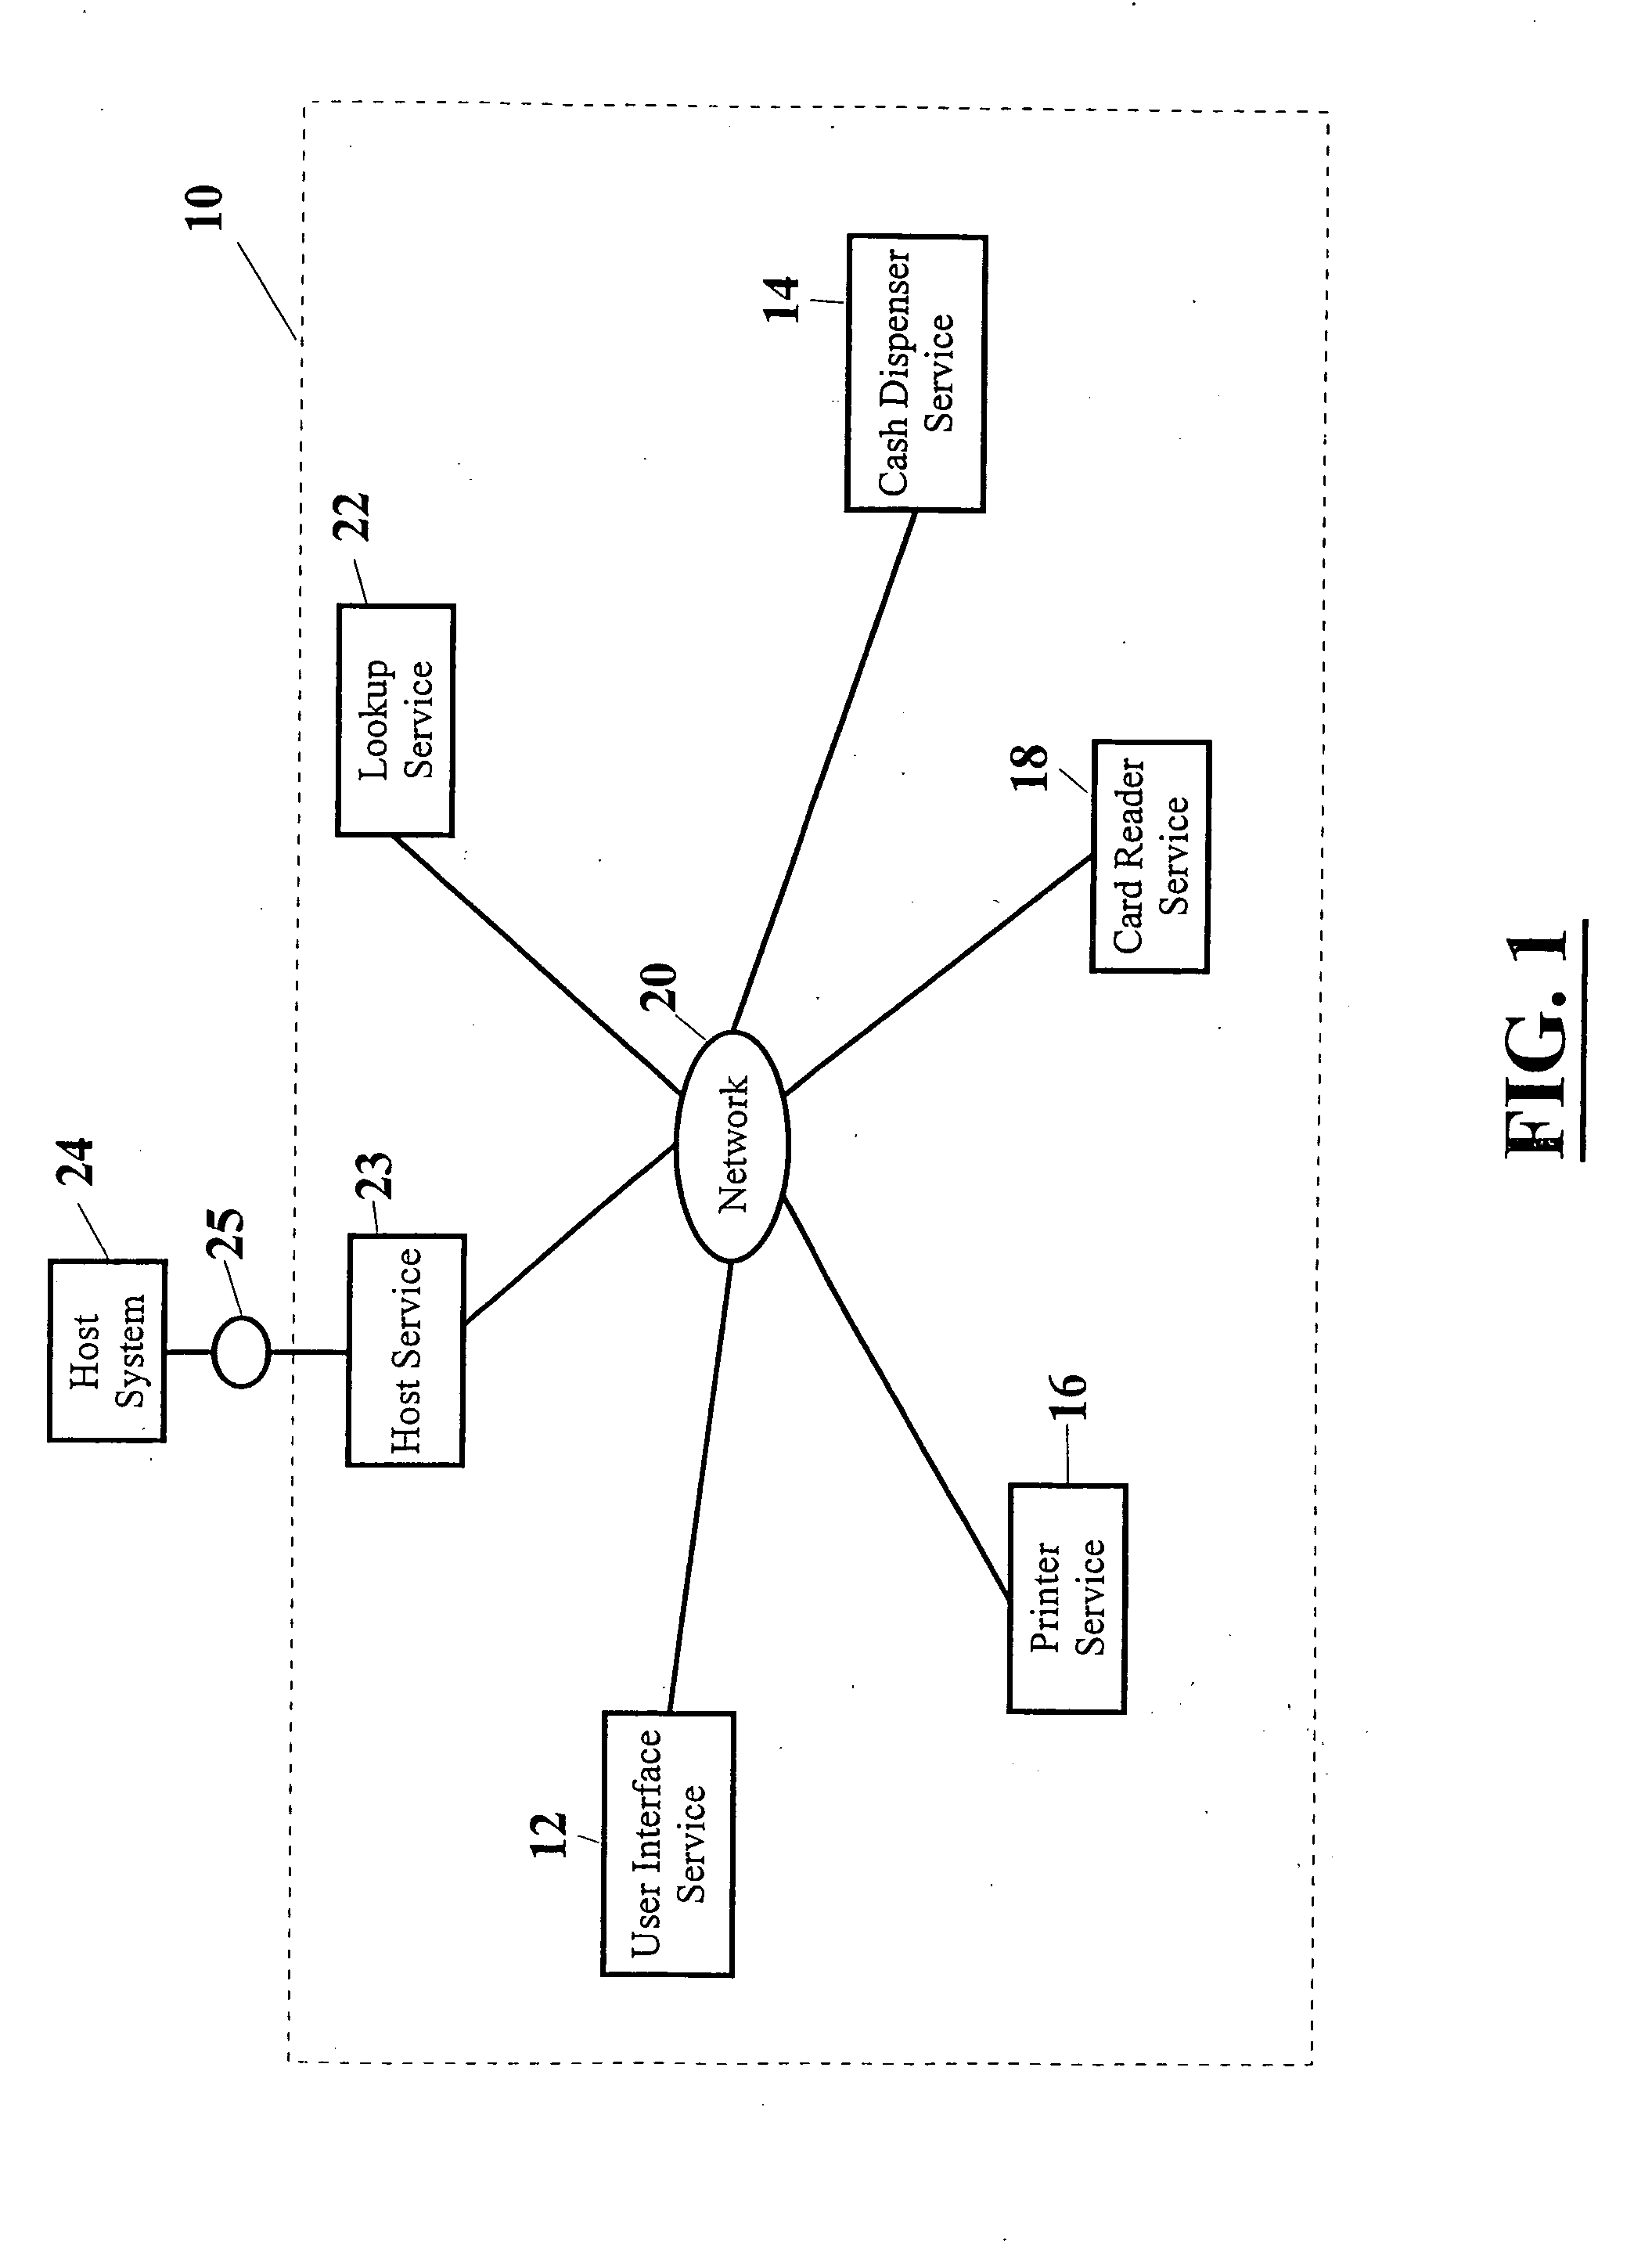 Cash dispensing automated transaction machine and method